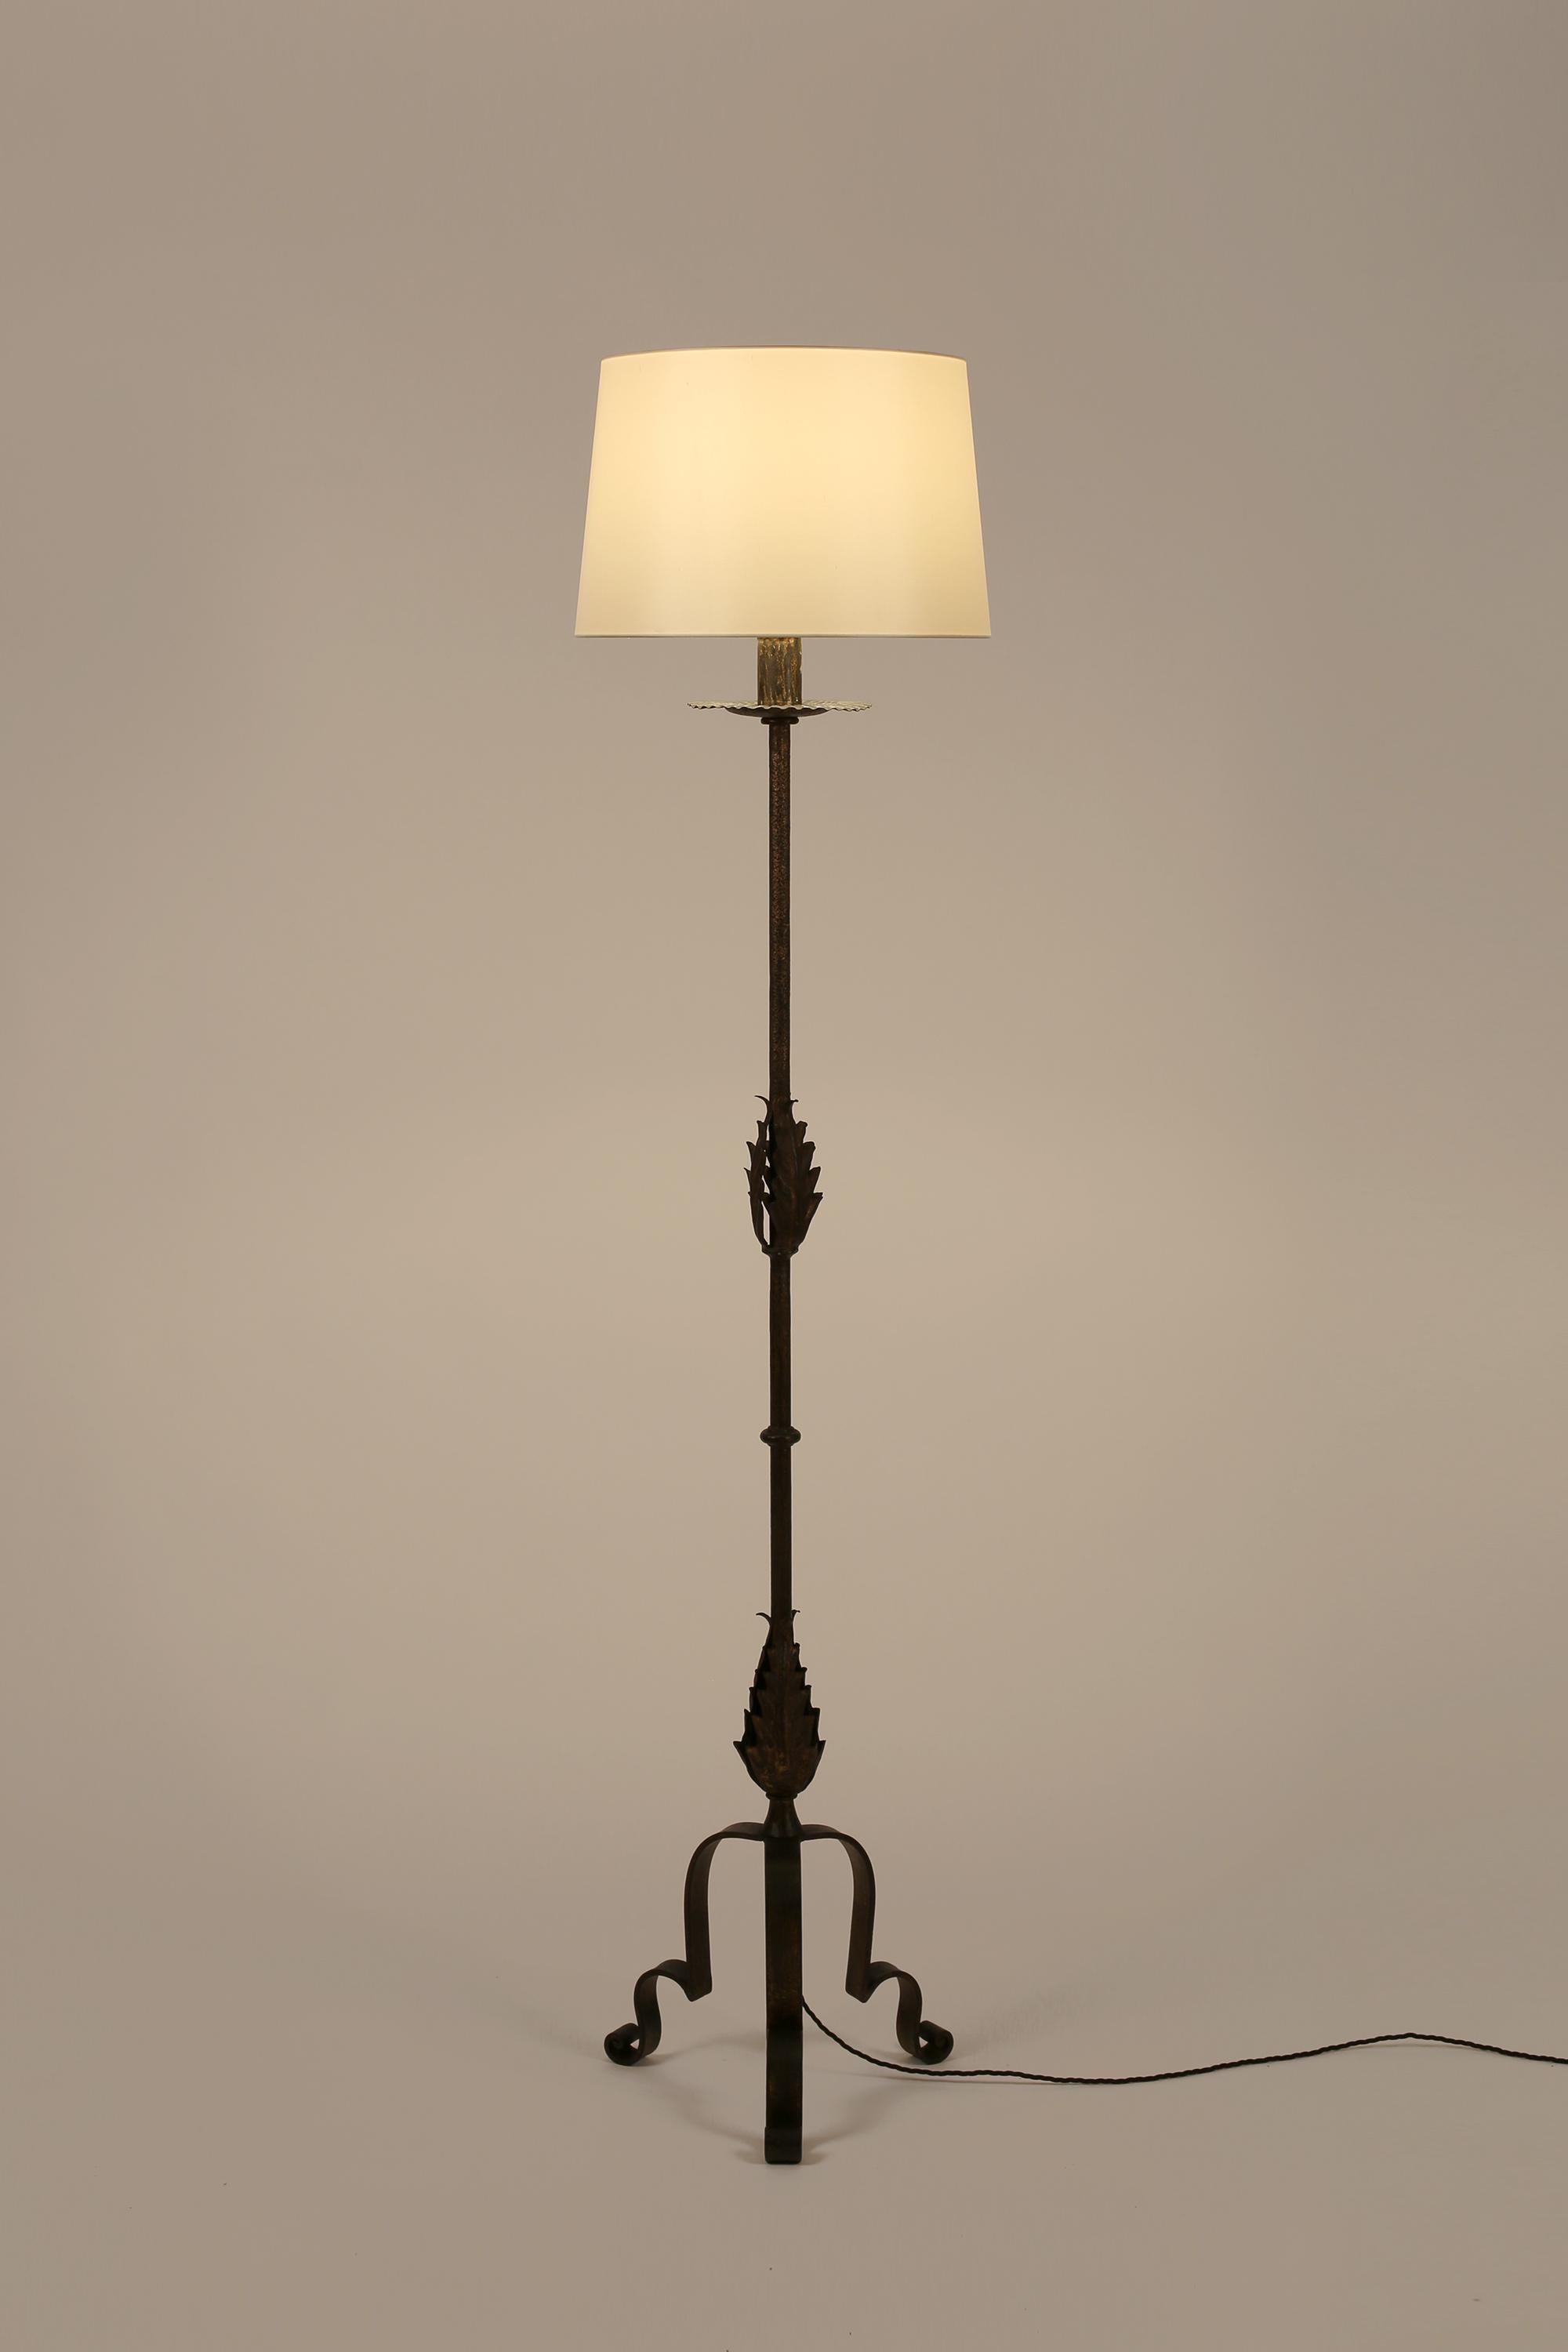 A forged and gilt iron floor lamp with ‘candle’ top, decorative foliate detailing to the stem and scrolling tripod base. Spanish, c. 1950s. Supplied with a tapered off-white dupion silk shade.

Rewired for the UK & PAT tested.